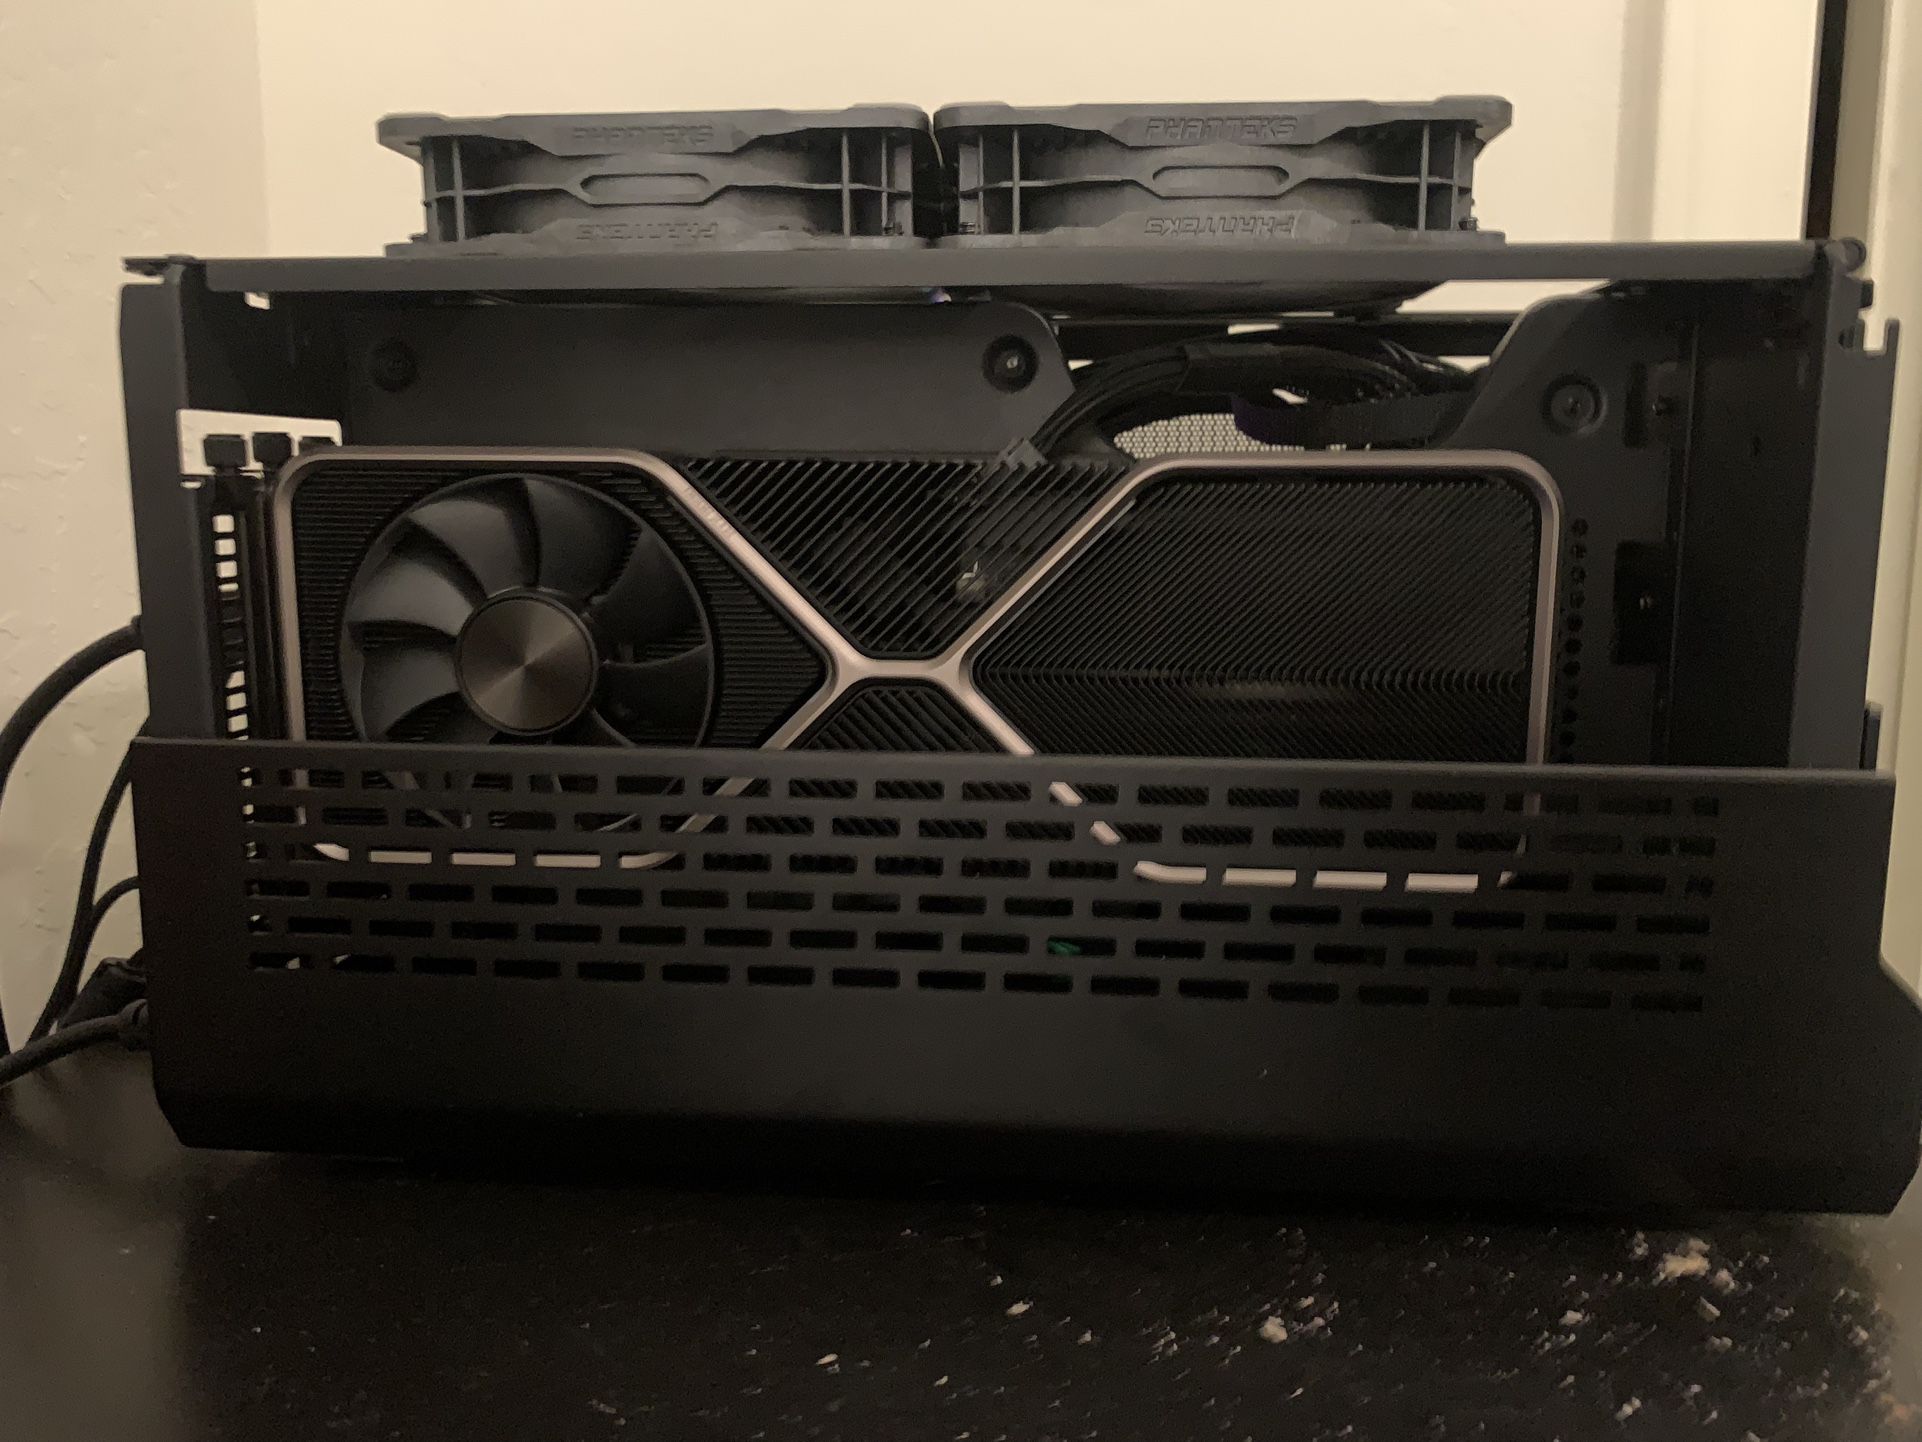 RTX 3080 Founder’s Edition